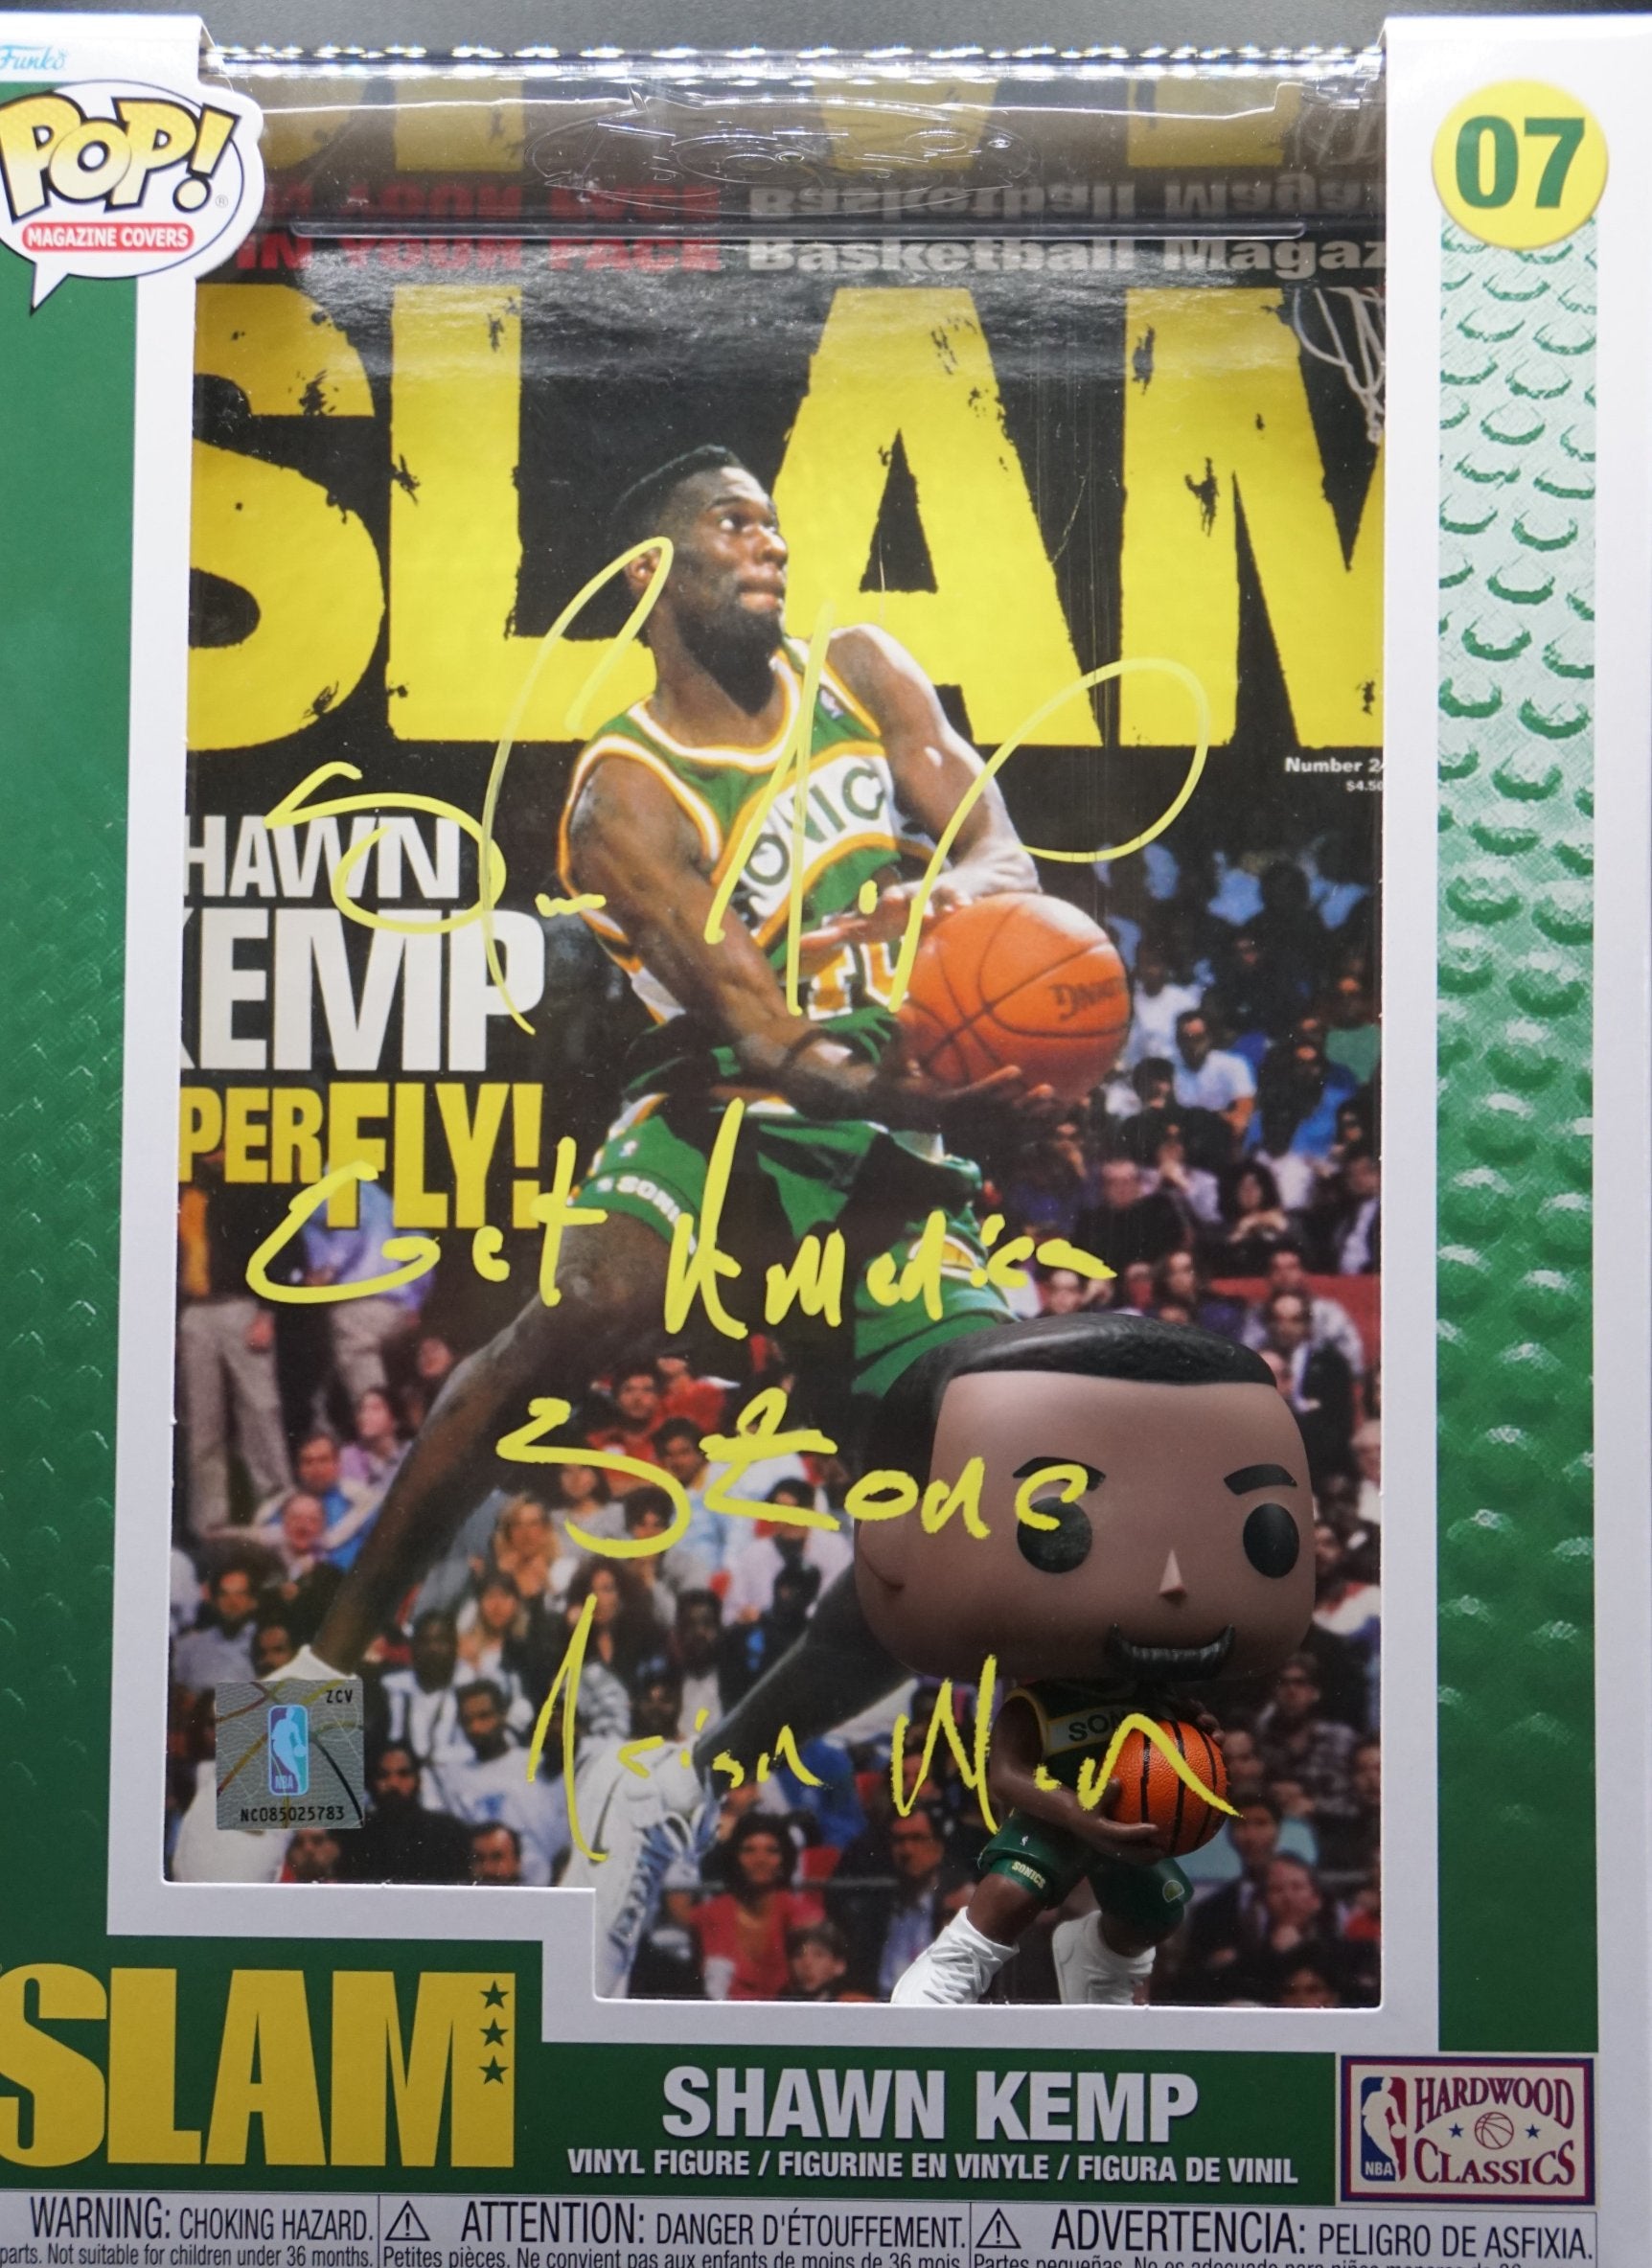 Slam Funko Pop #07 Signed by Shawn Kemp with Inscription "Get America Stoned"